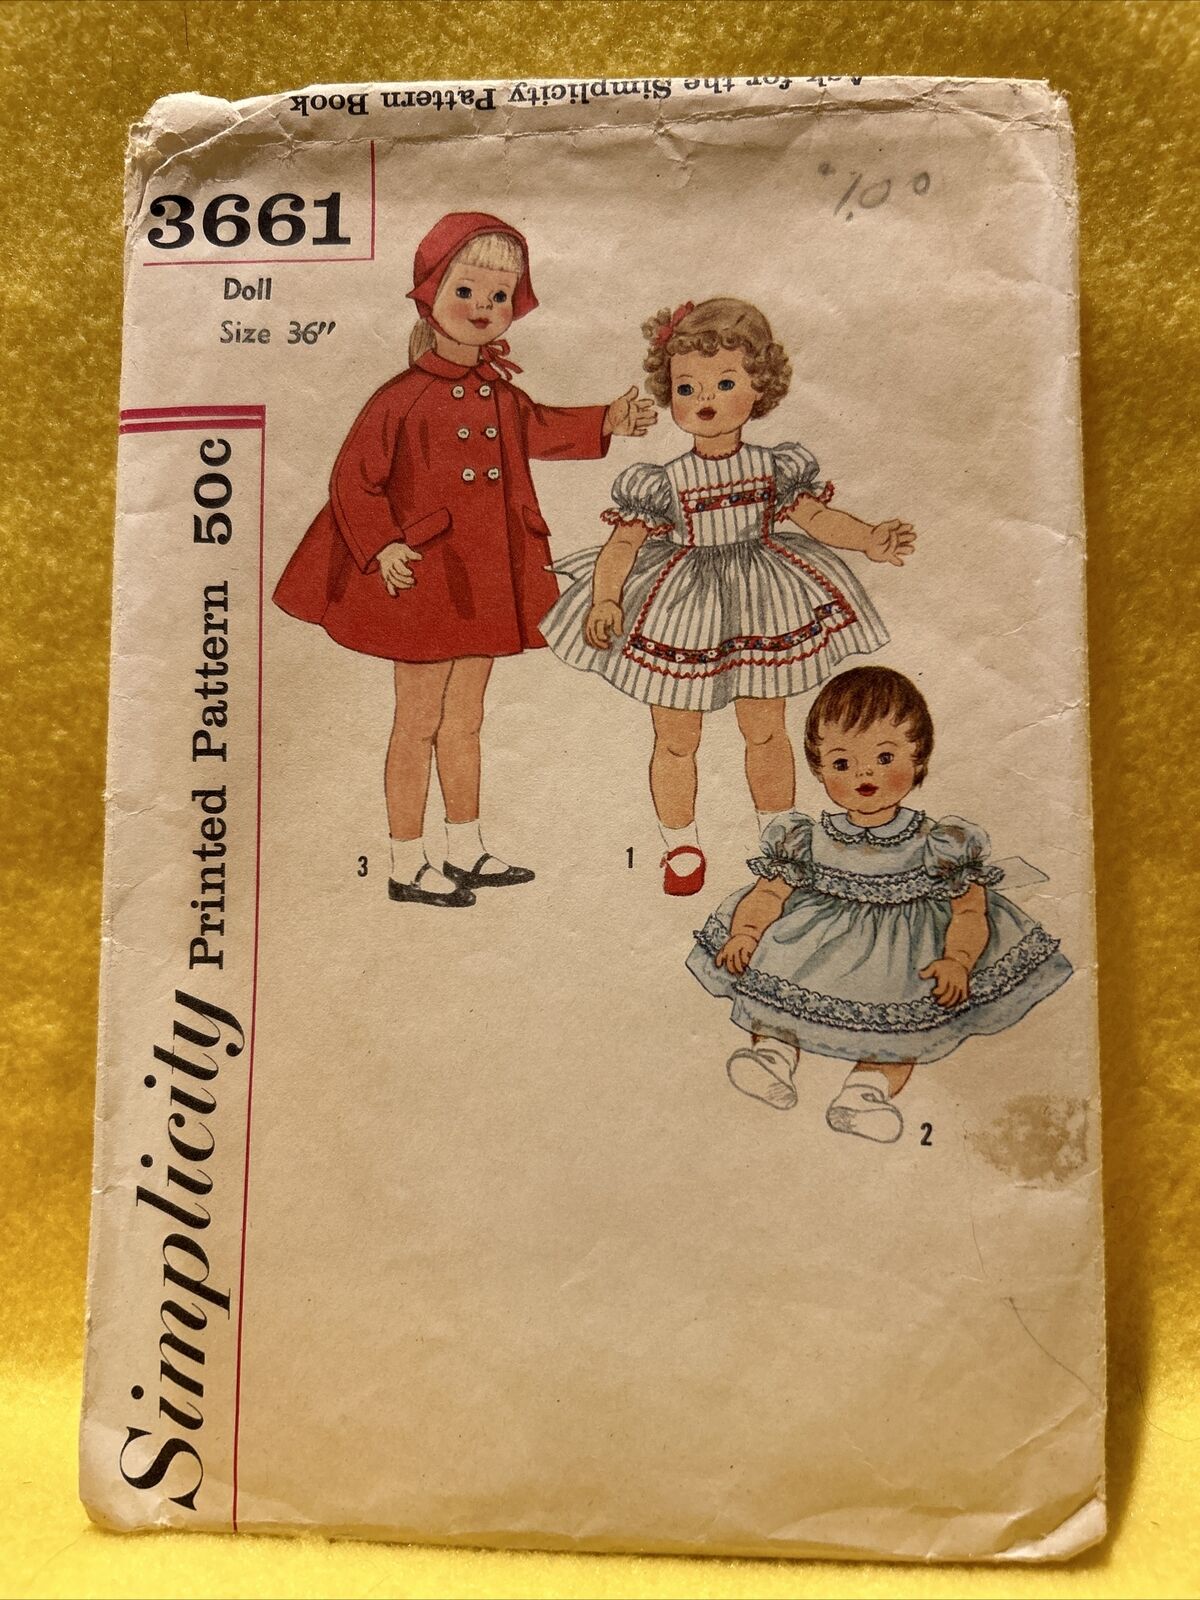 VINTAGE SIMPLICITY 3661 DOLL CLOTHES PATTERN FOR 36 INCH DOLLS (Missing 1 piece)